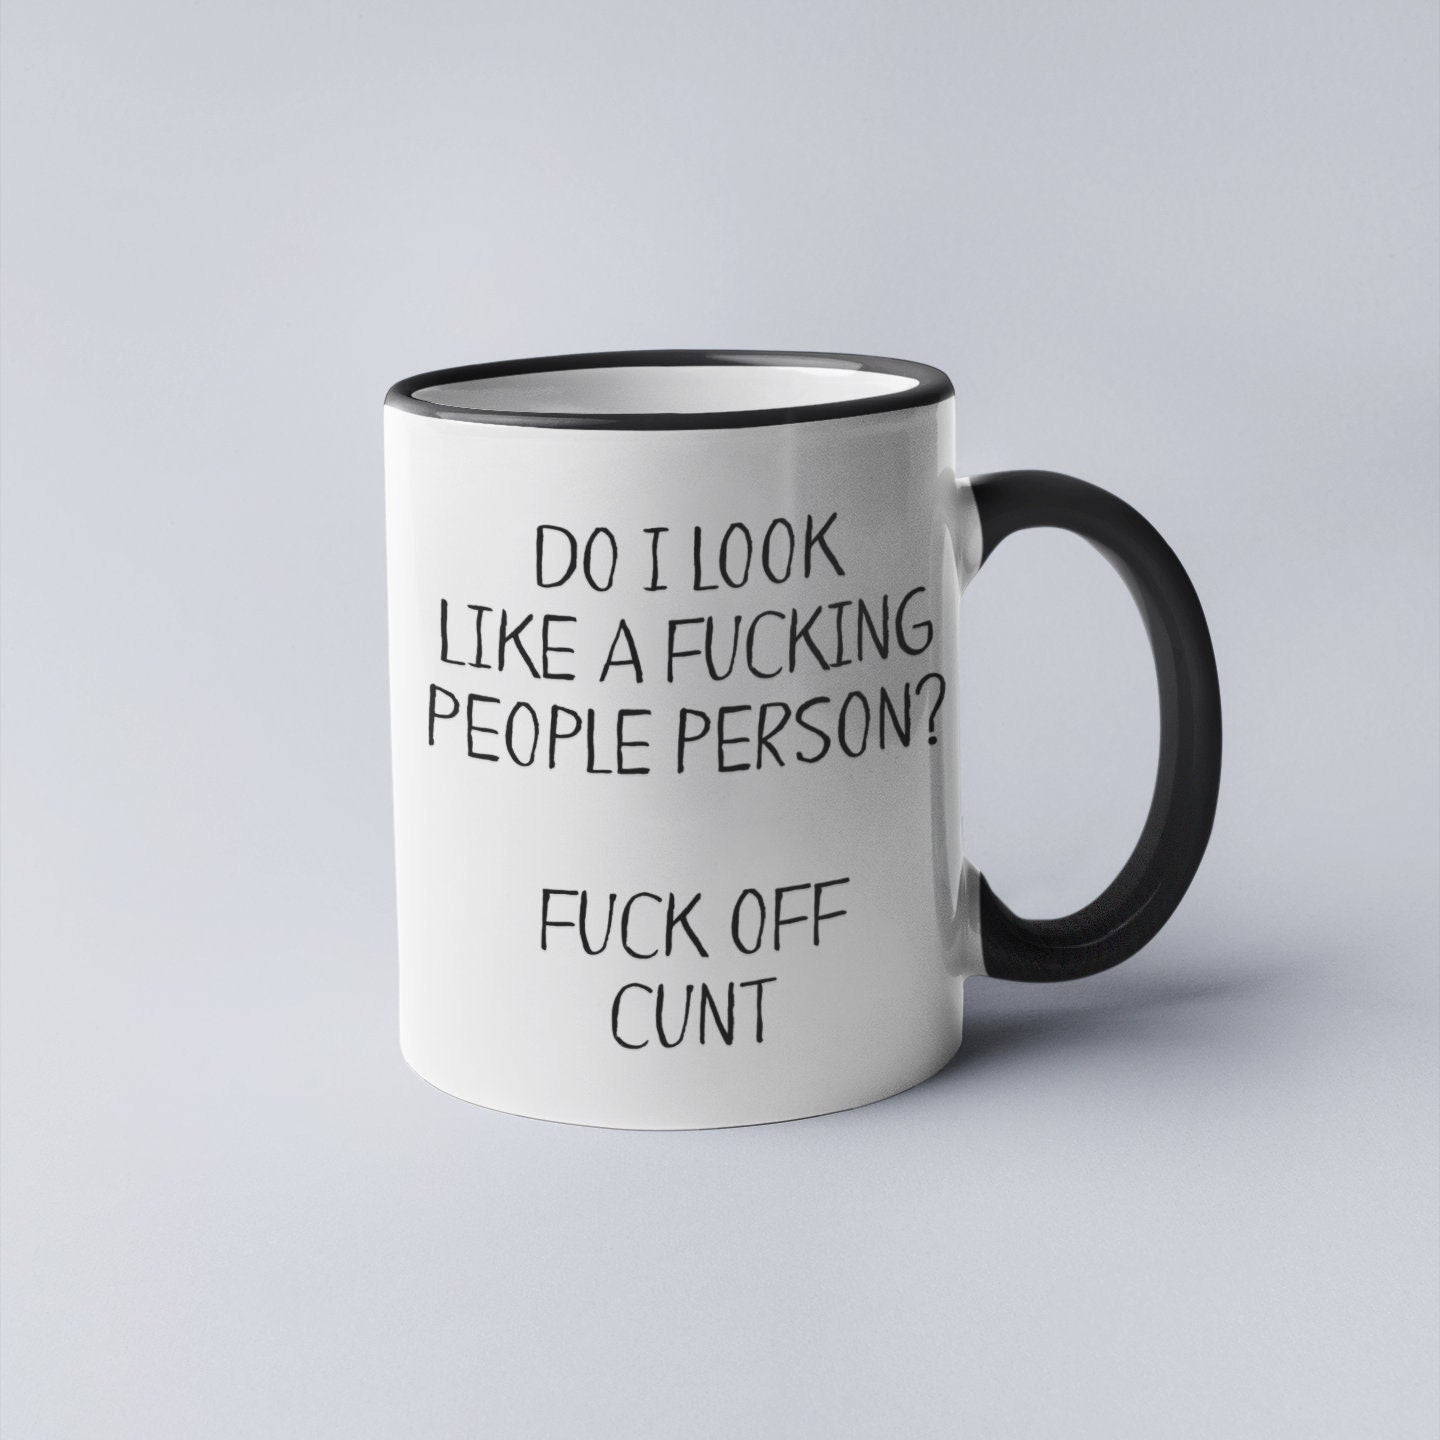 A white ceramic mug featuring the funny quote ‘do i look like a fucking people person? Fuck off c*nt’. Printed in black ink.